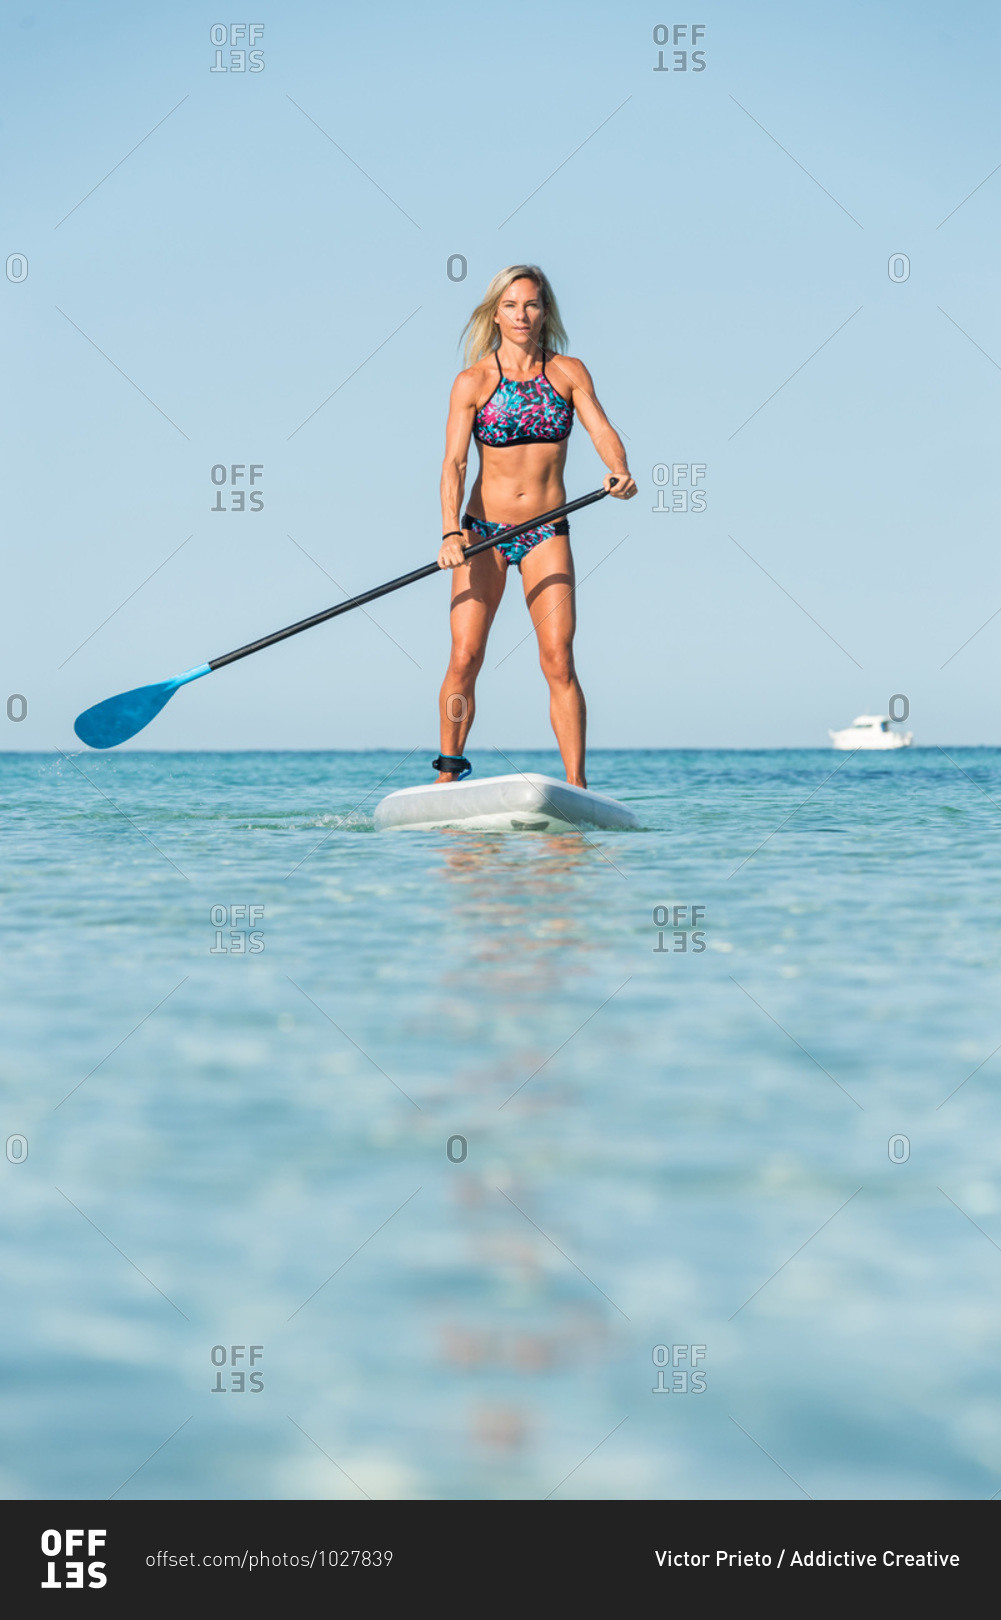 Fit female surfer in bikini standing on paddleboard and rowing while training in sea on sunny day